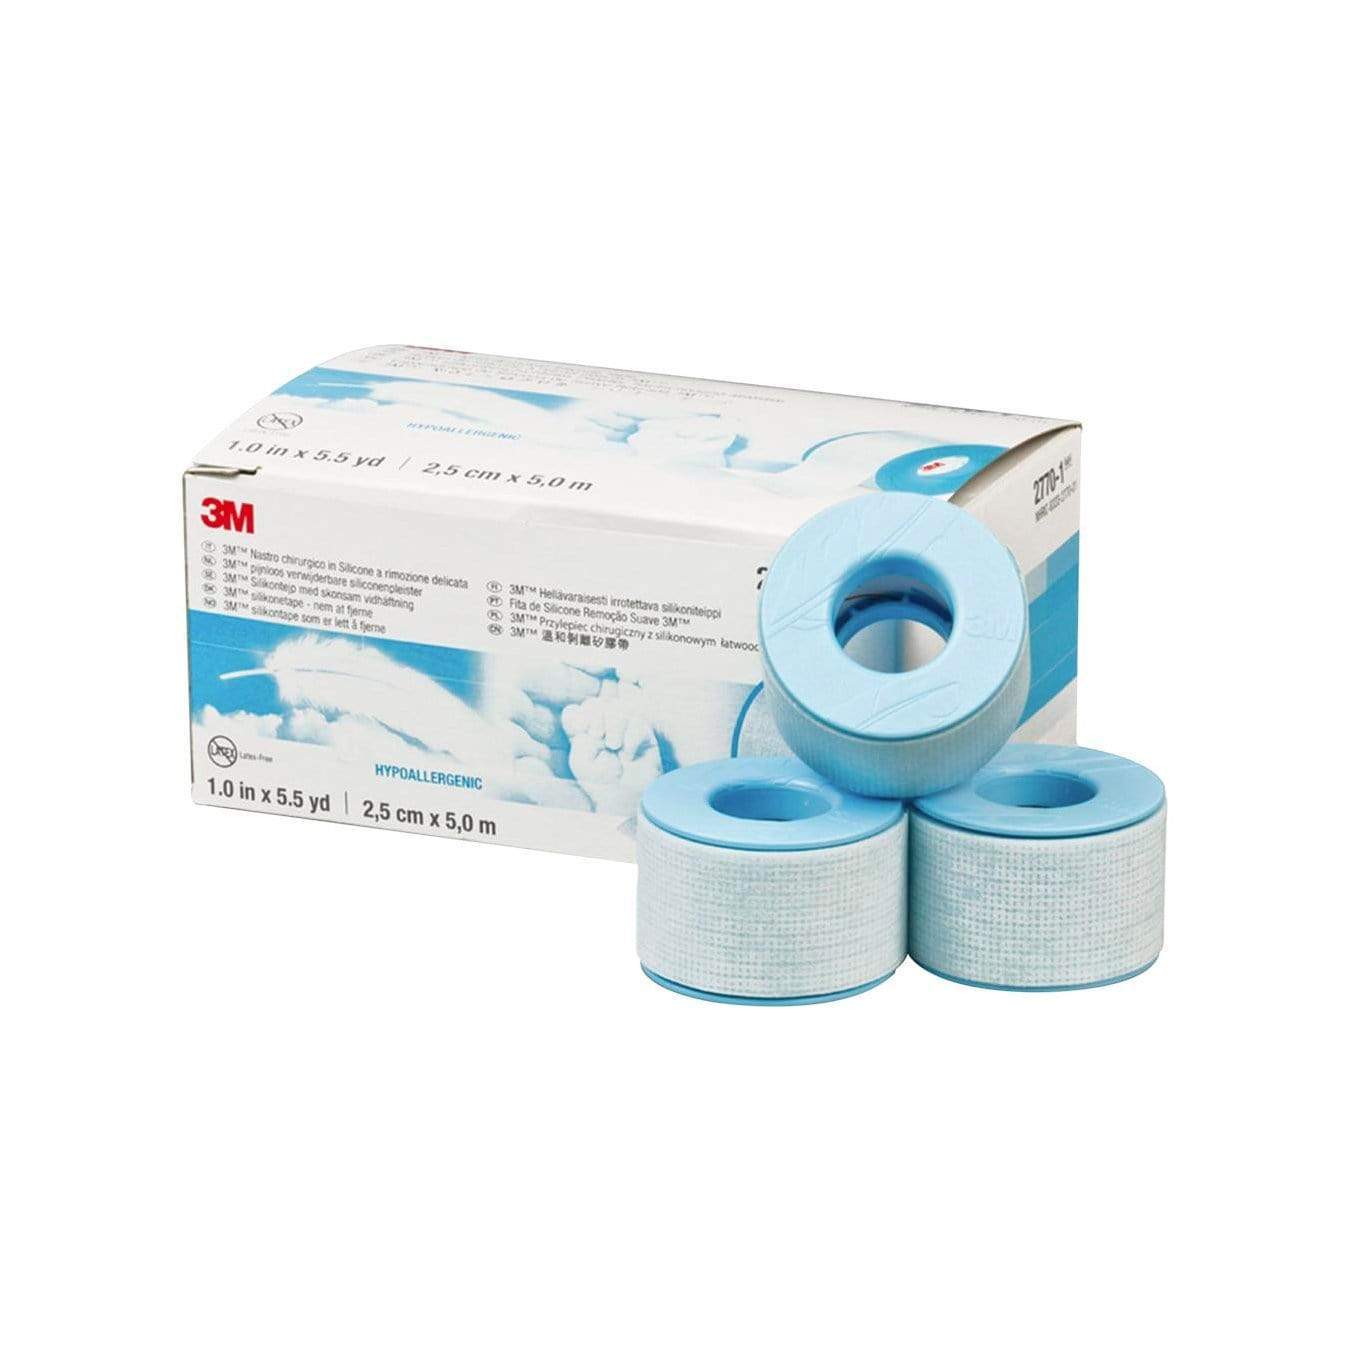 3M Healthcare Surgical Tapes Surgical Tape / 25mm x 5m 3M Micropore Surgical Tape